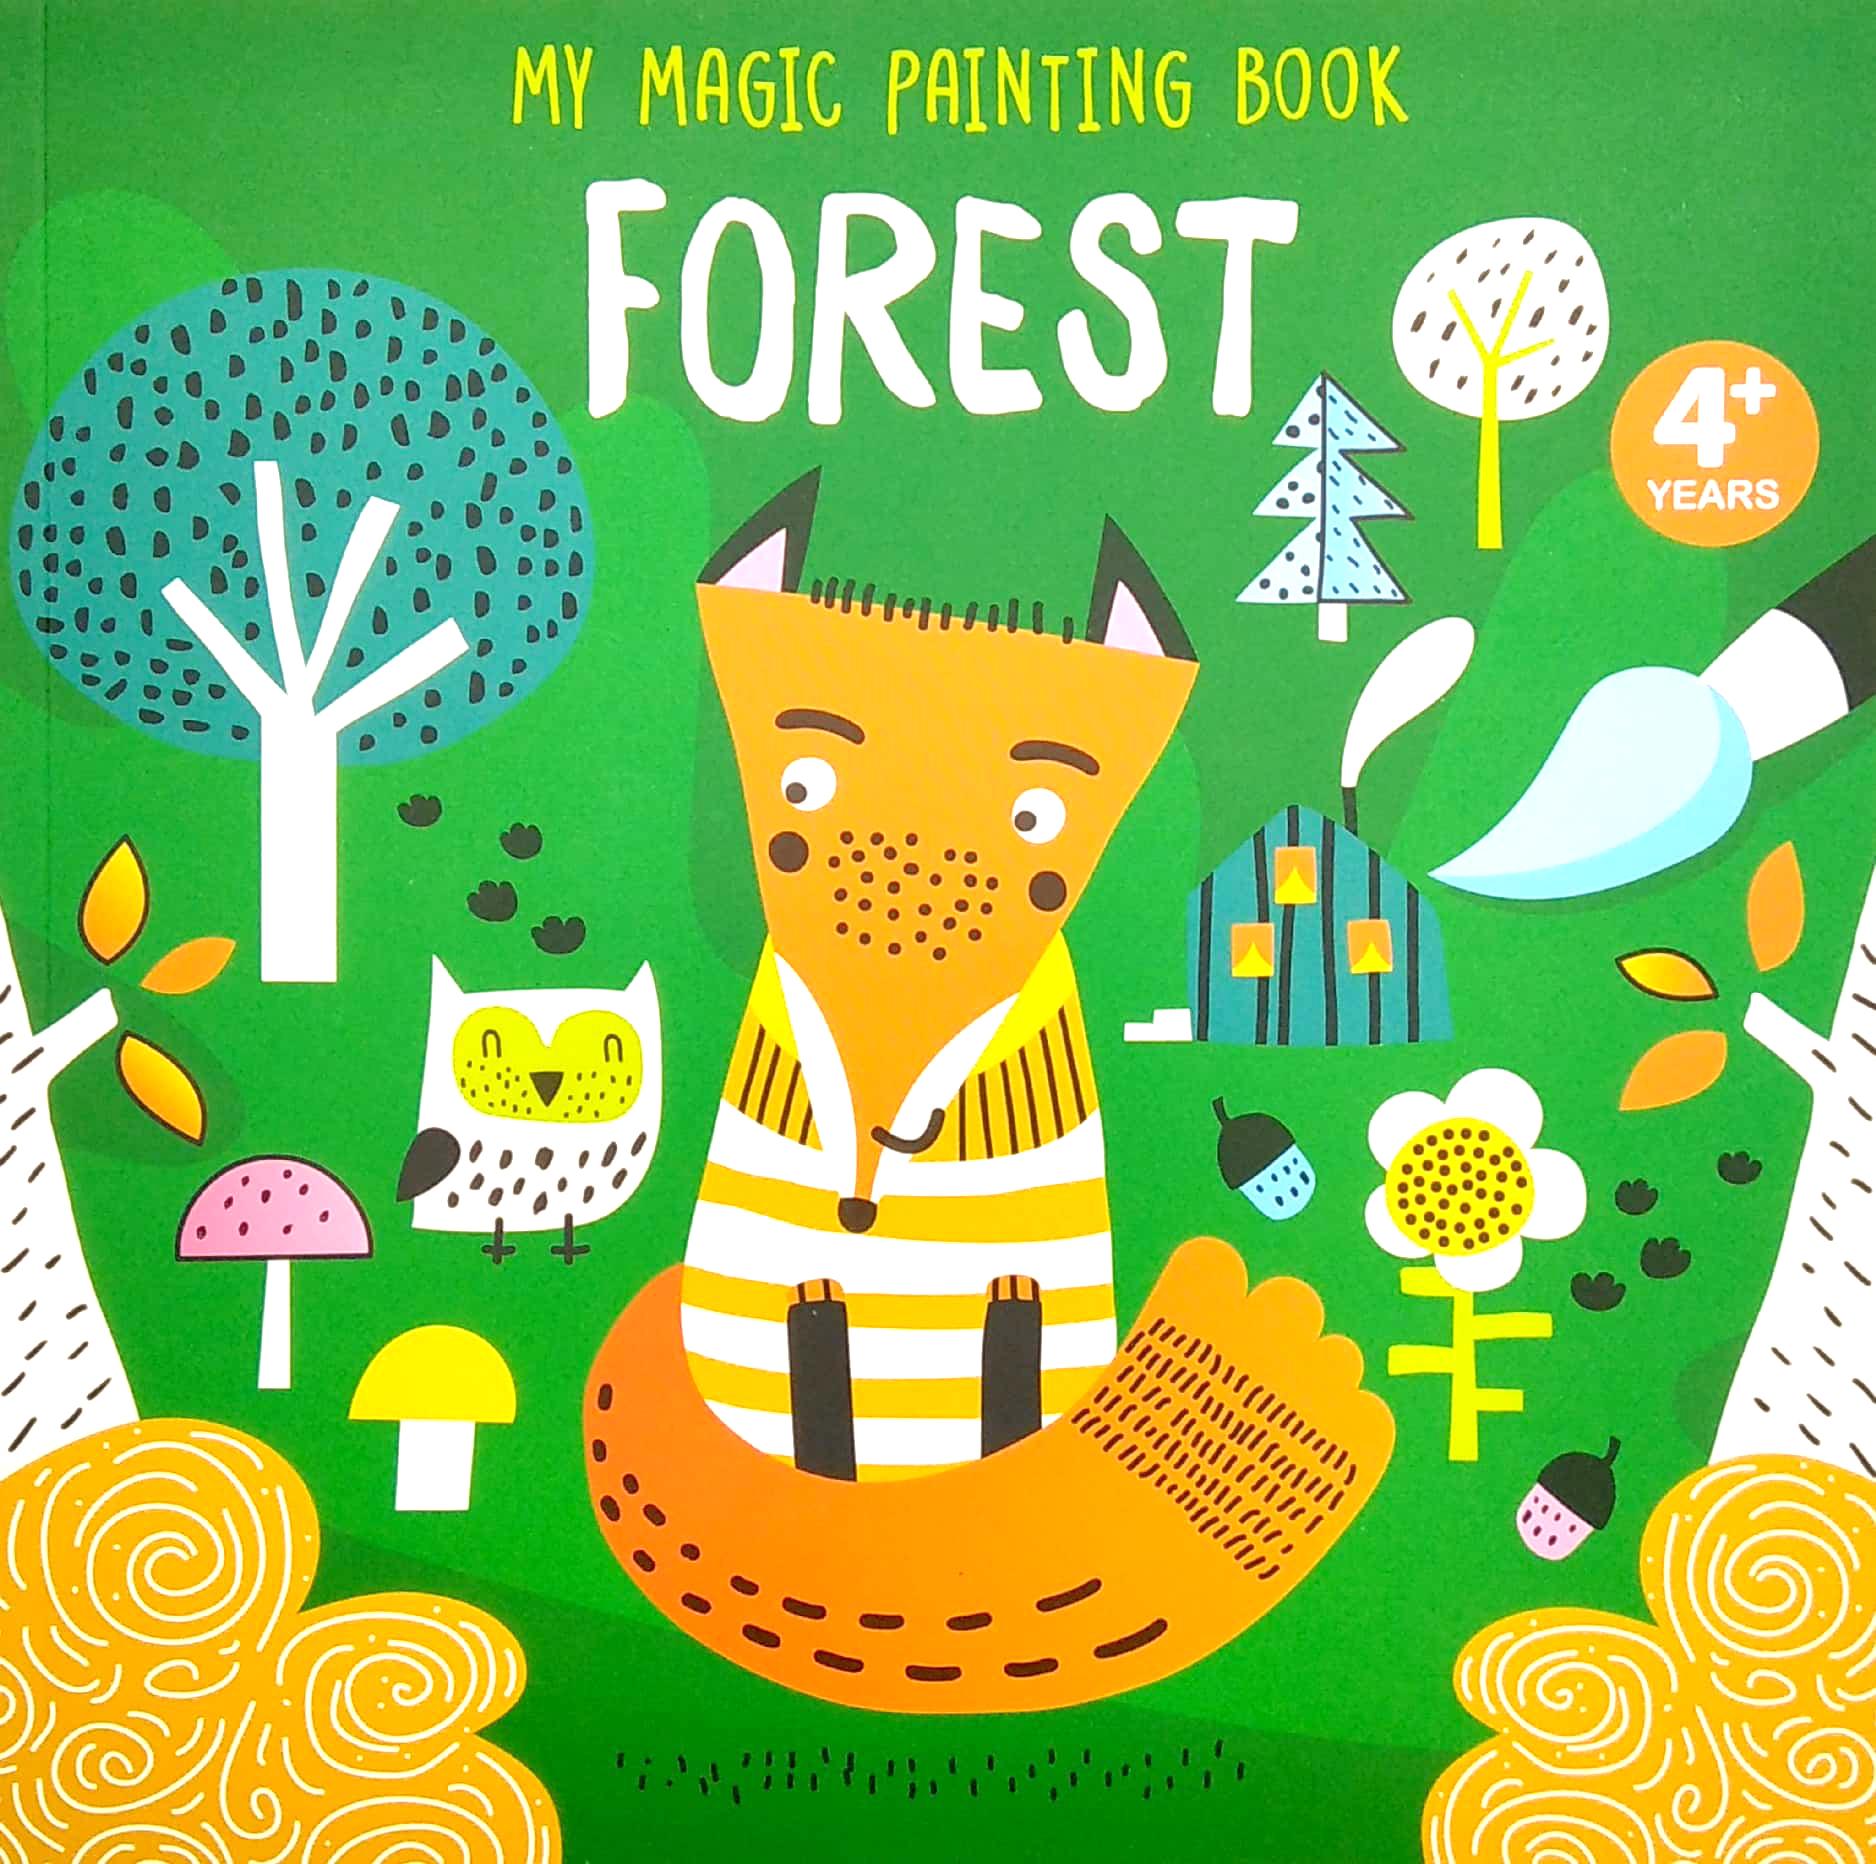 My Magic Painting Book: Forest